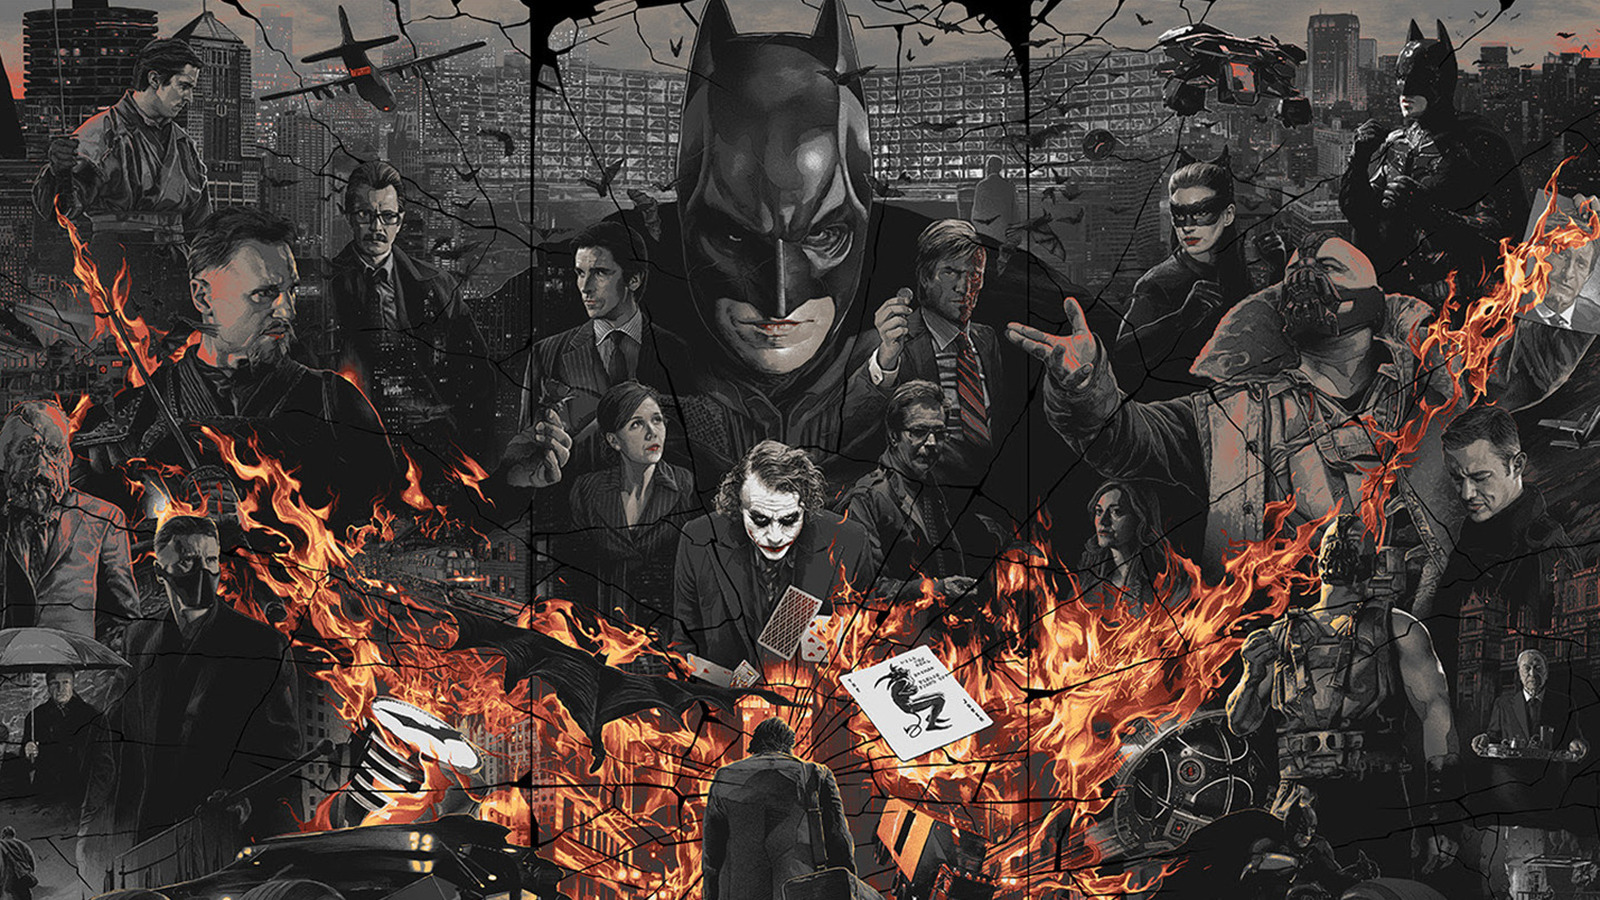 Book Review: The Art and Making of The Dark Knight Trilogy